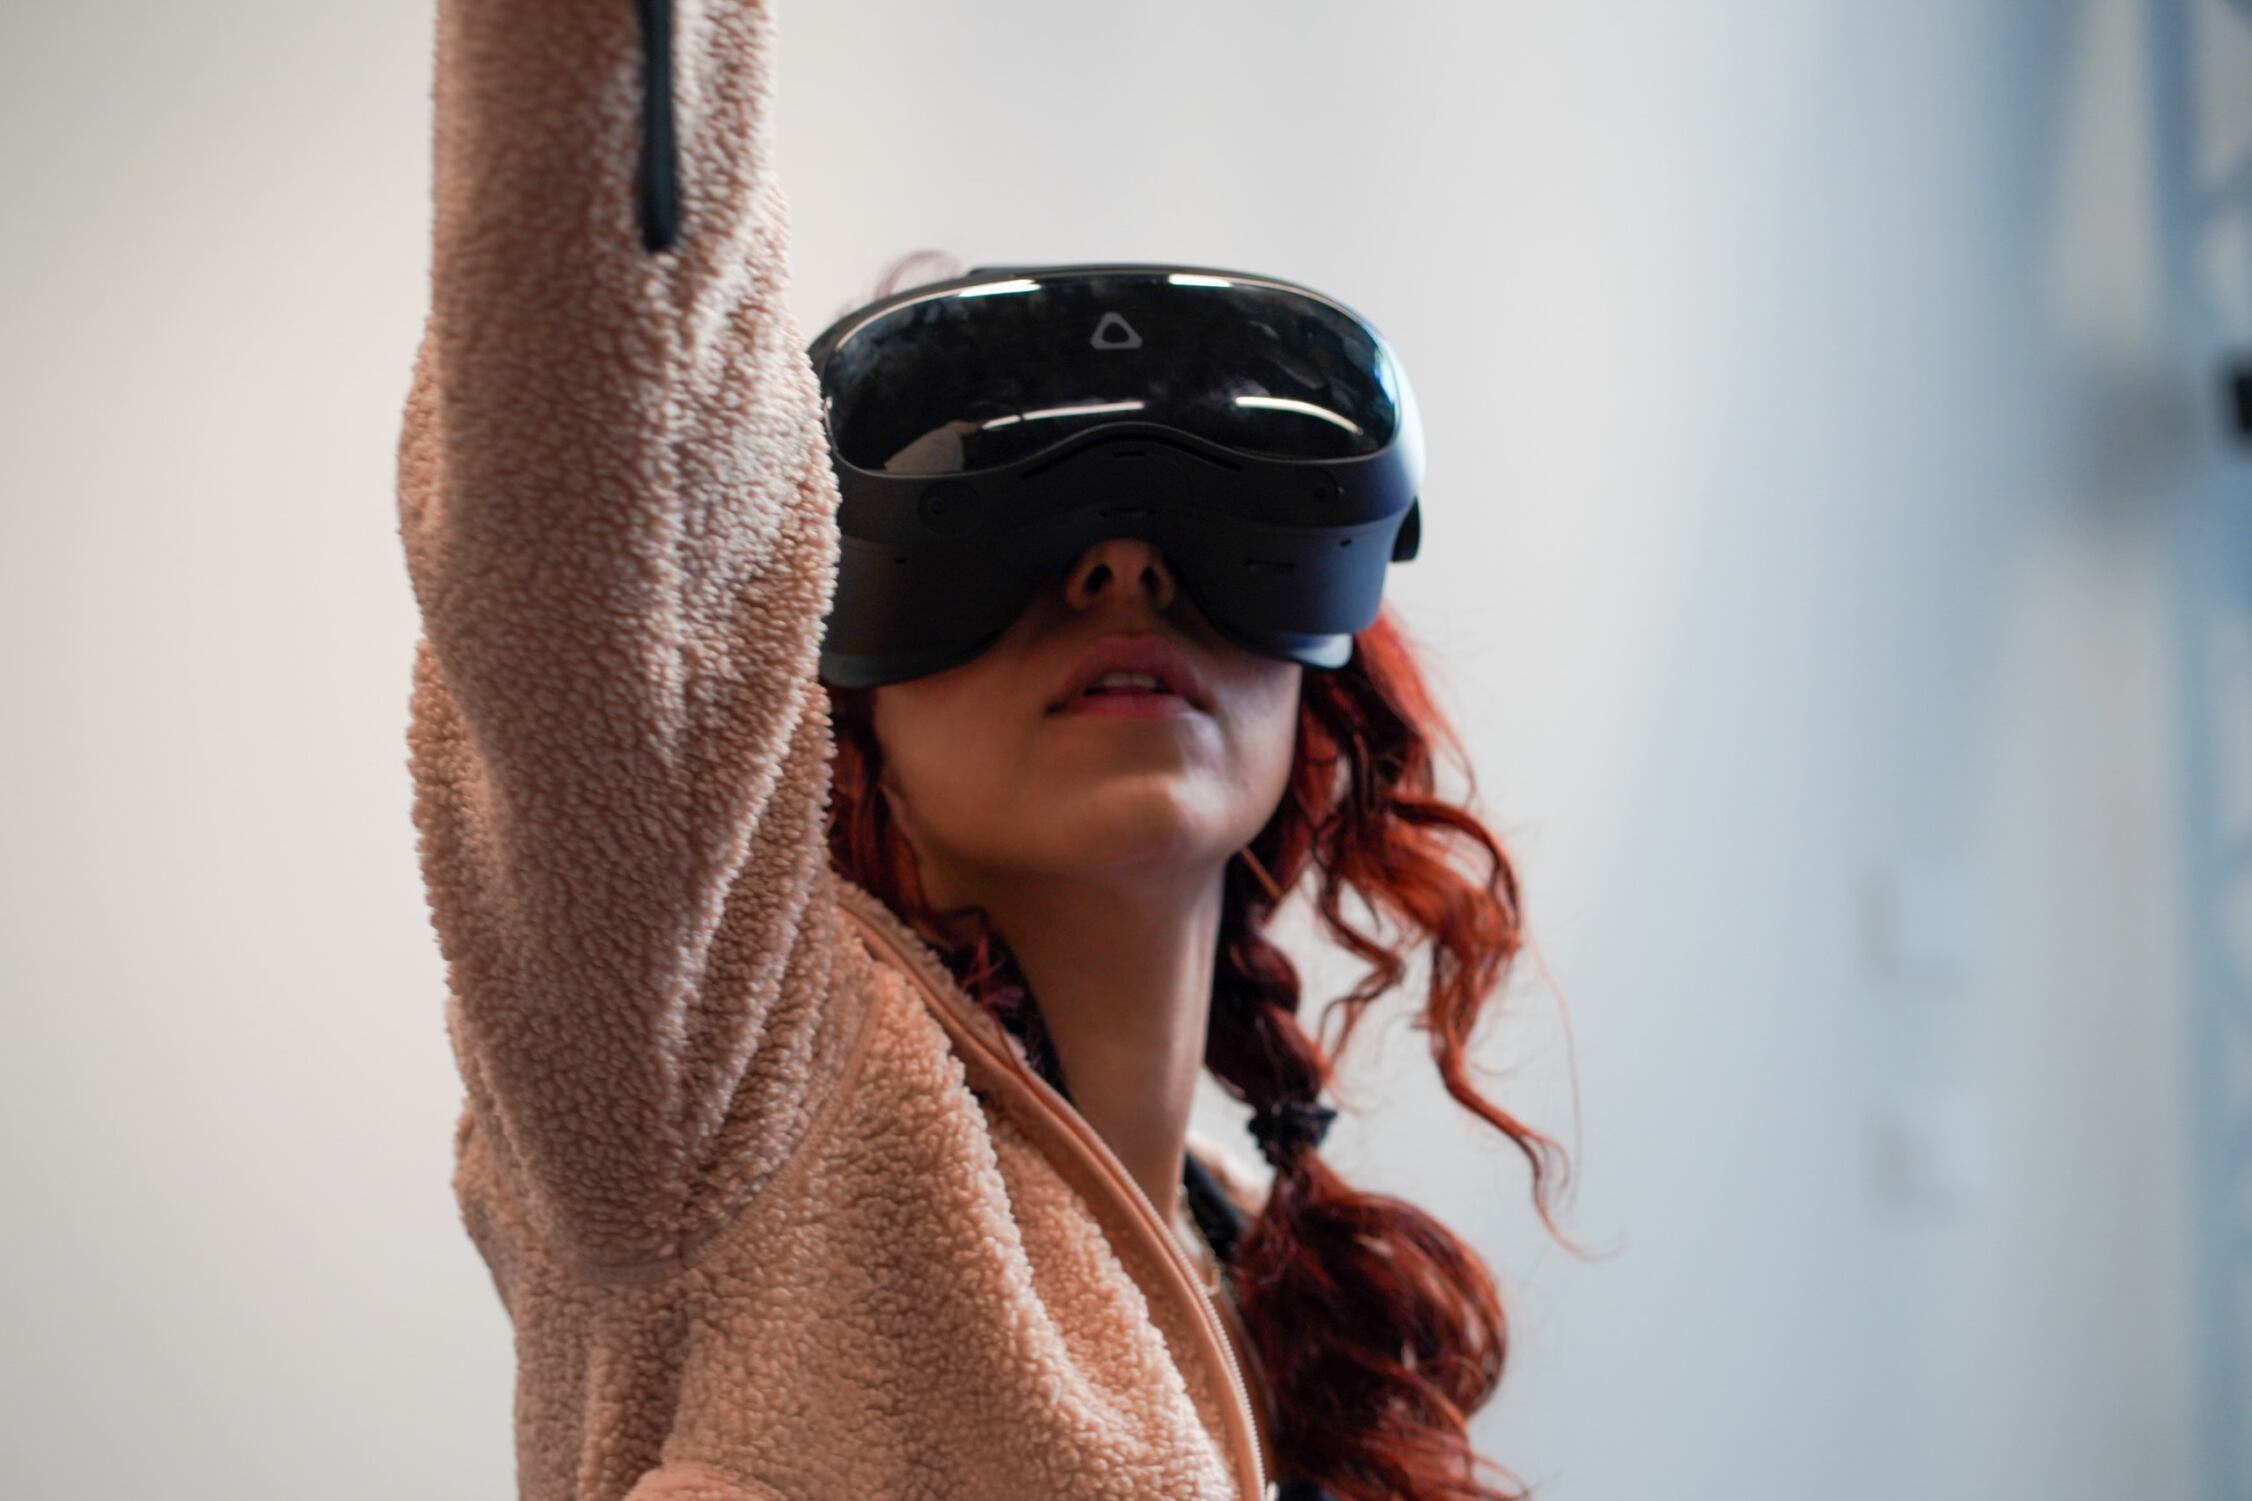 New Bachelor in Immersive Technologies combines technology, psychology and design